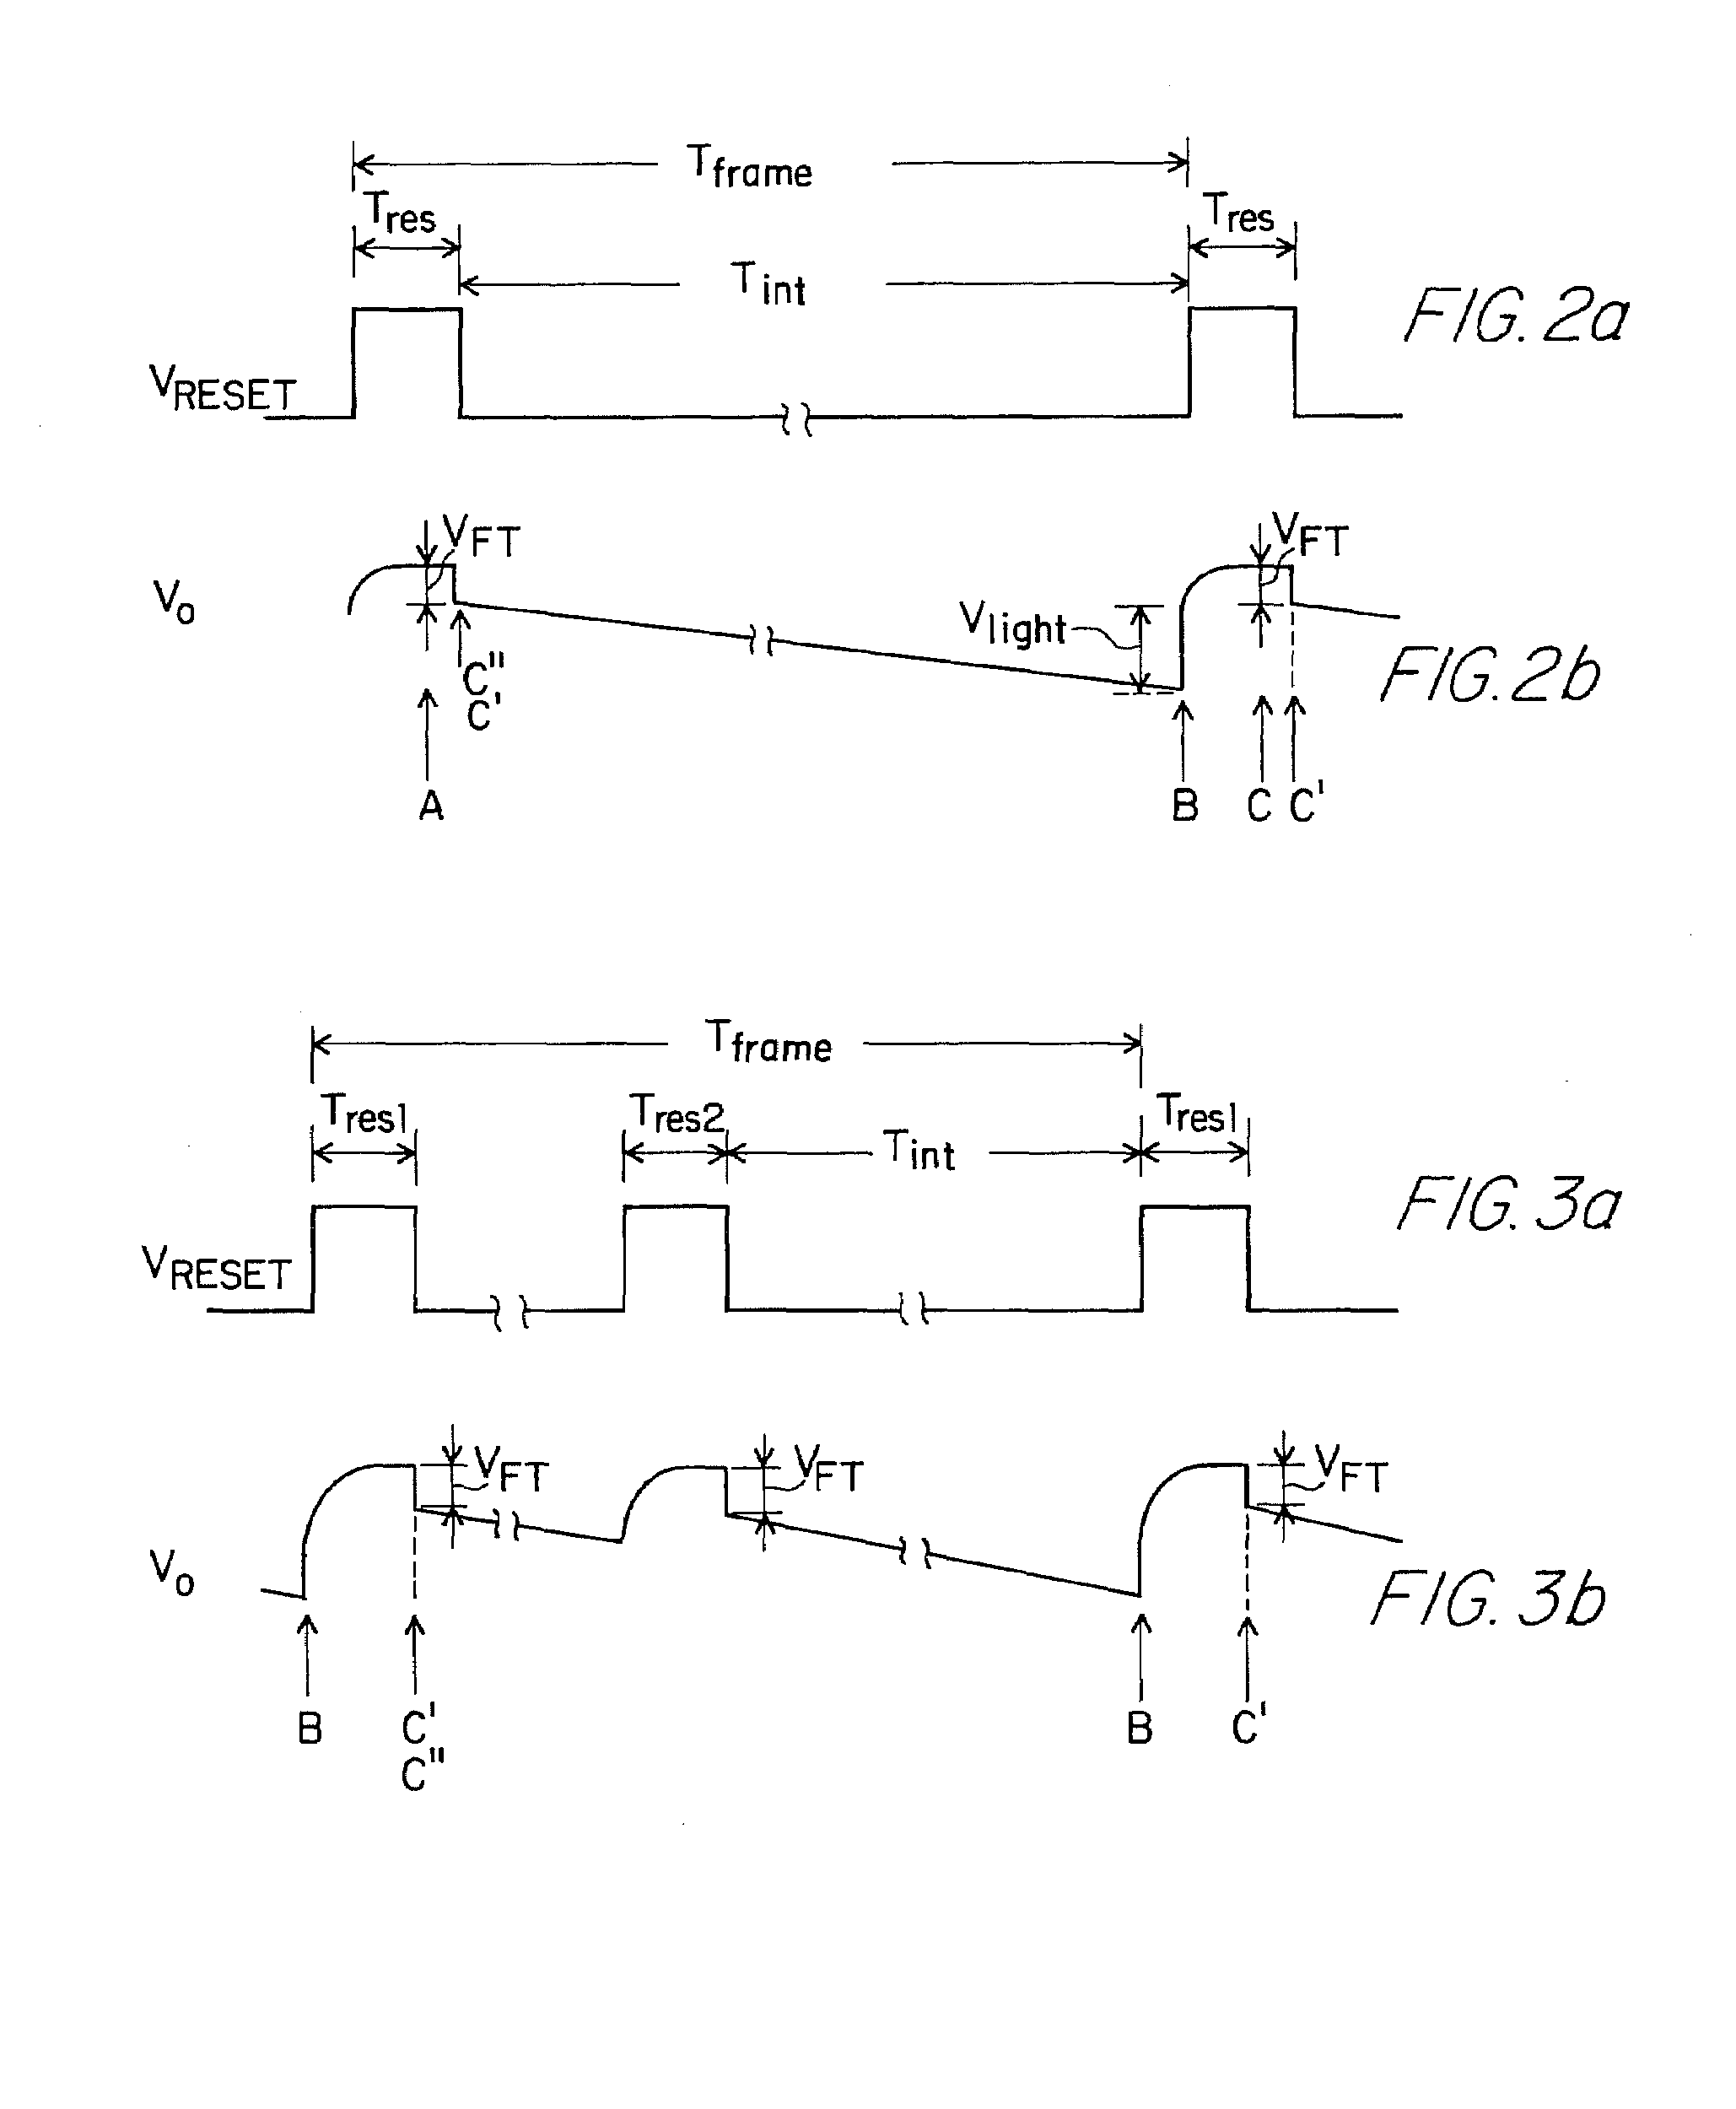 Method for cancellation of the effect of charge feedthrough on CMOS pixel output